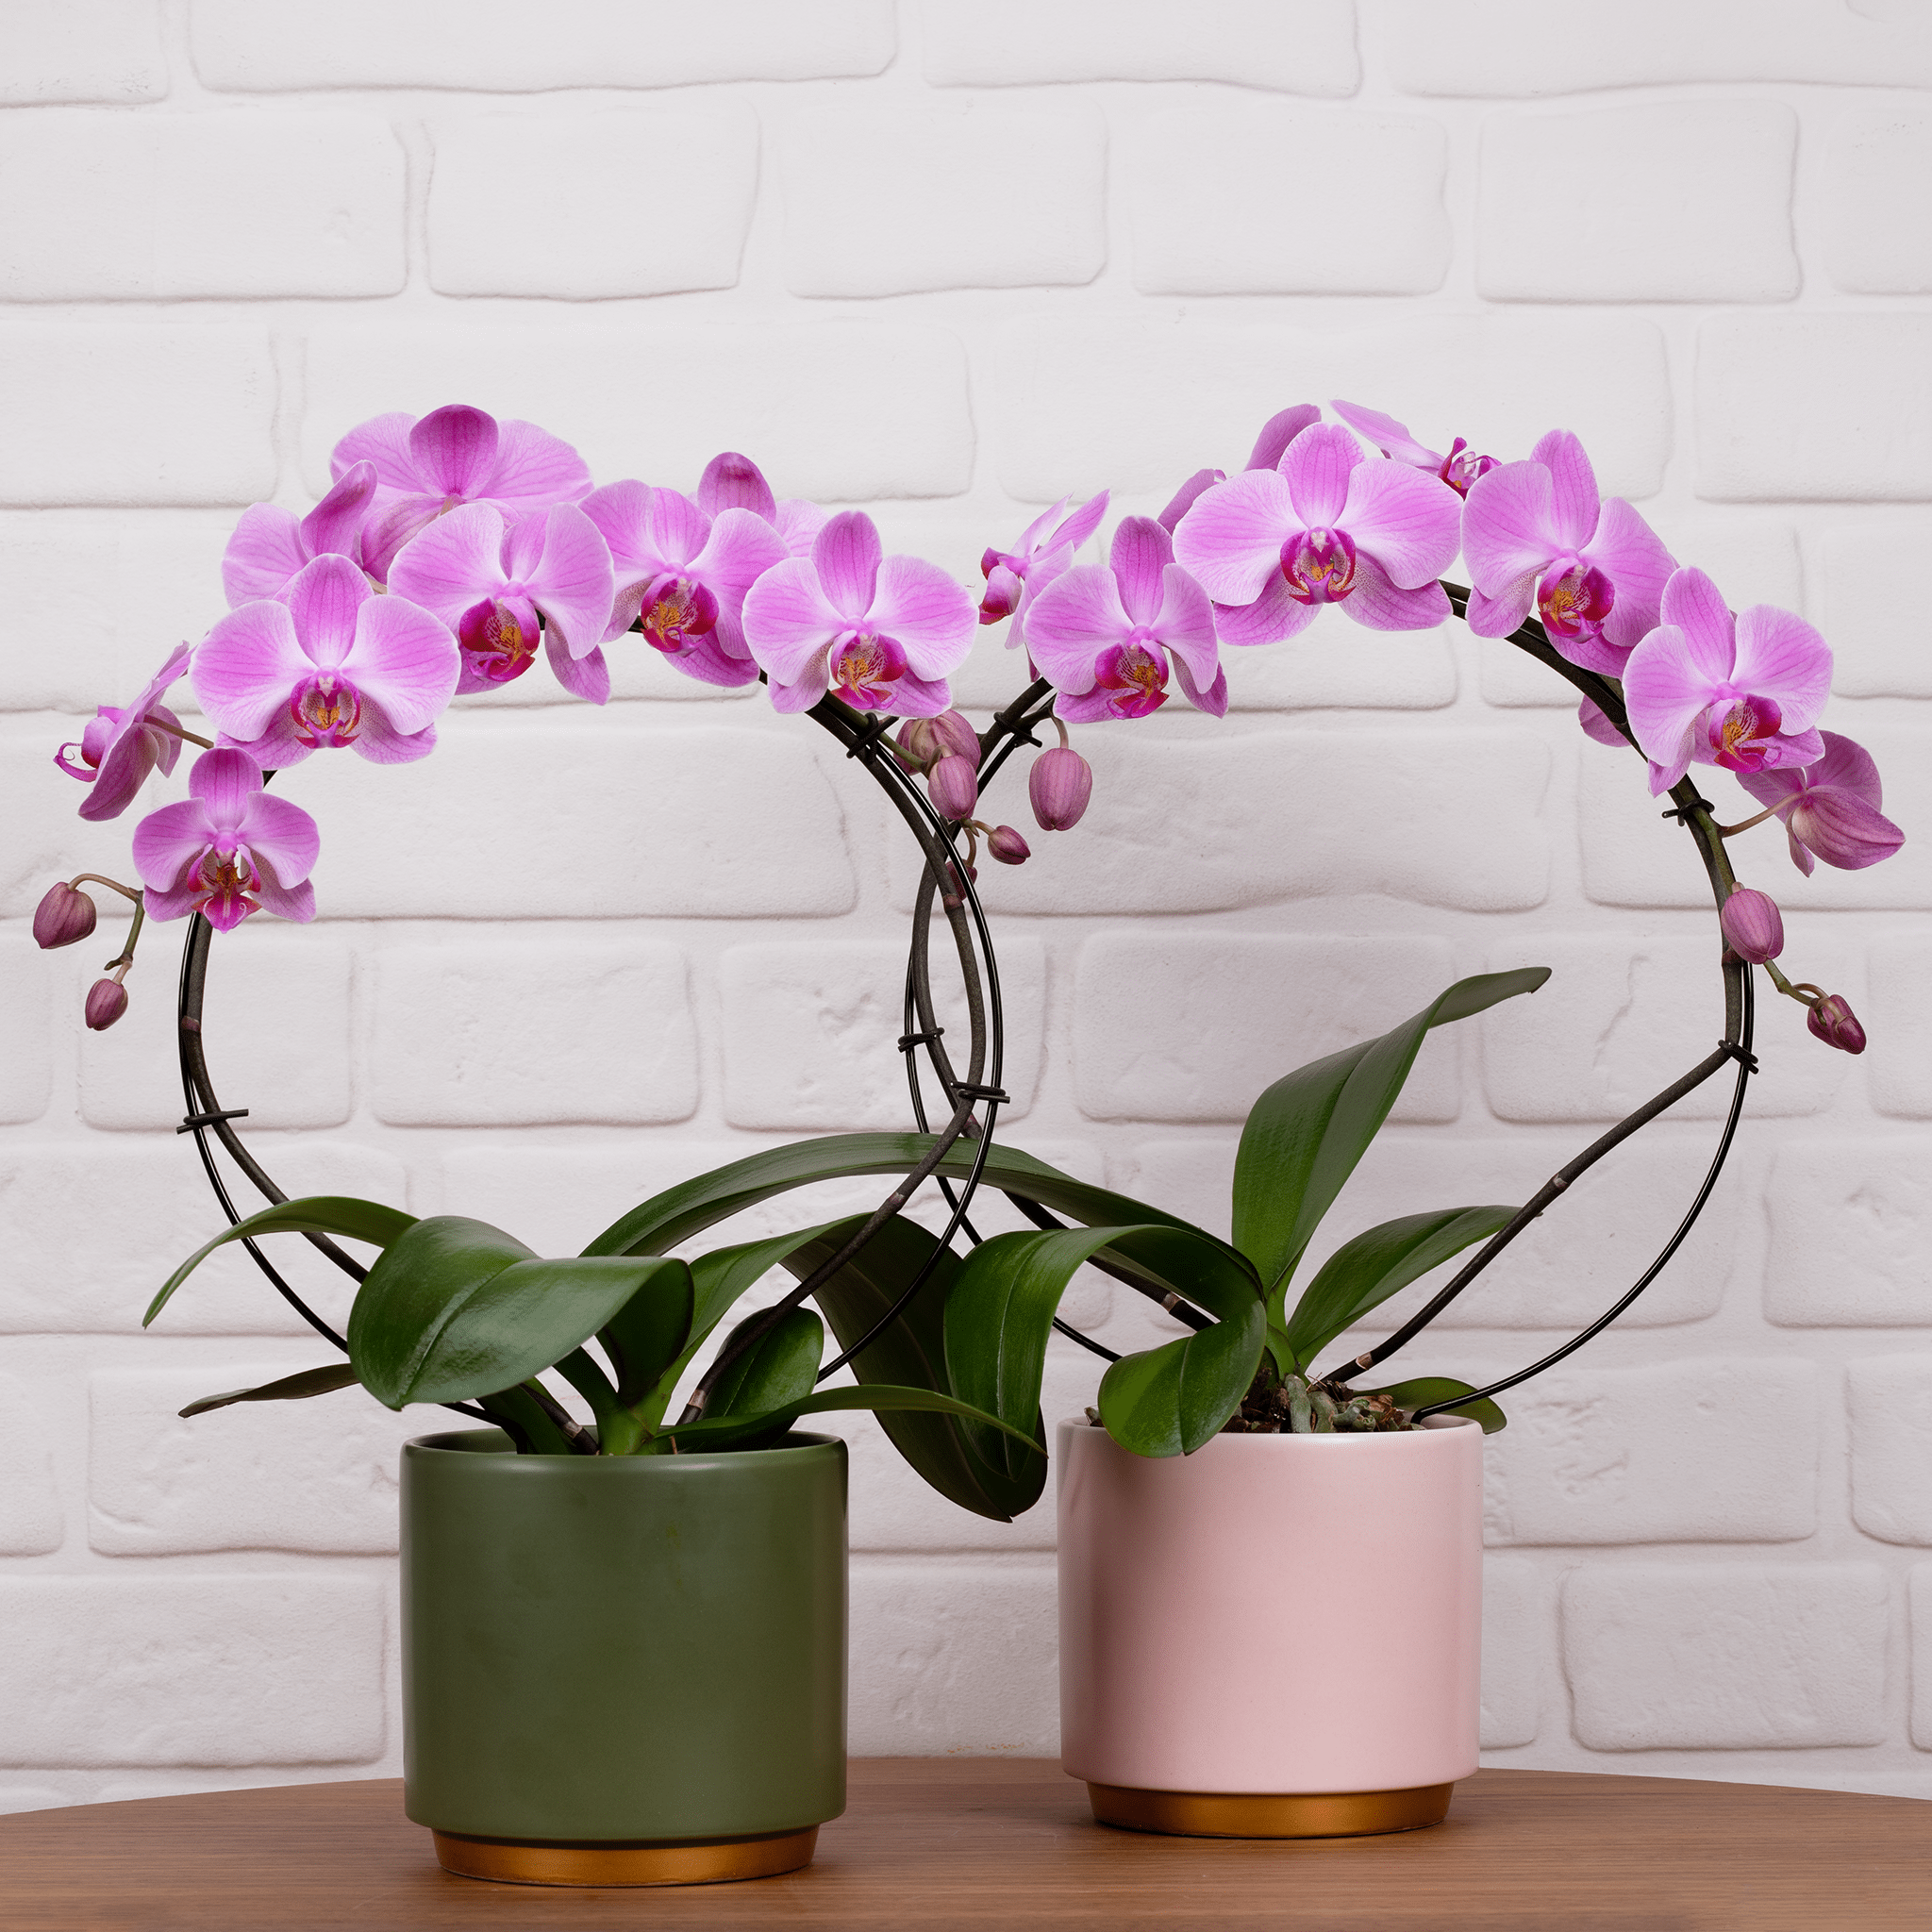 Downton: Large Hoop Orchid In Ceramic - Love Orchids